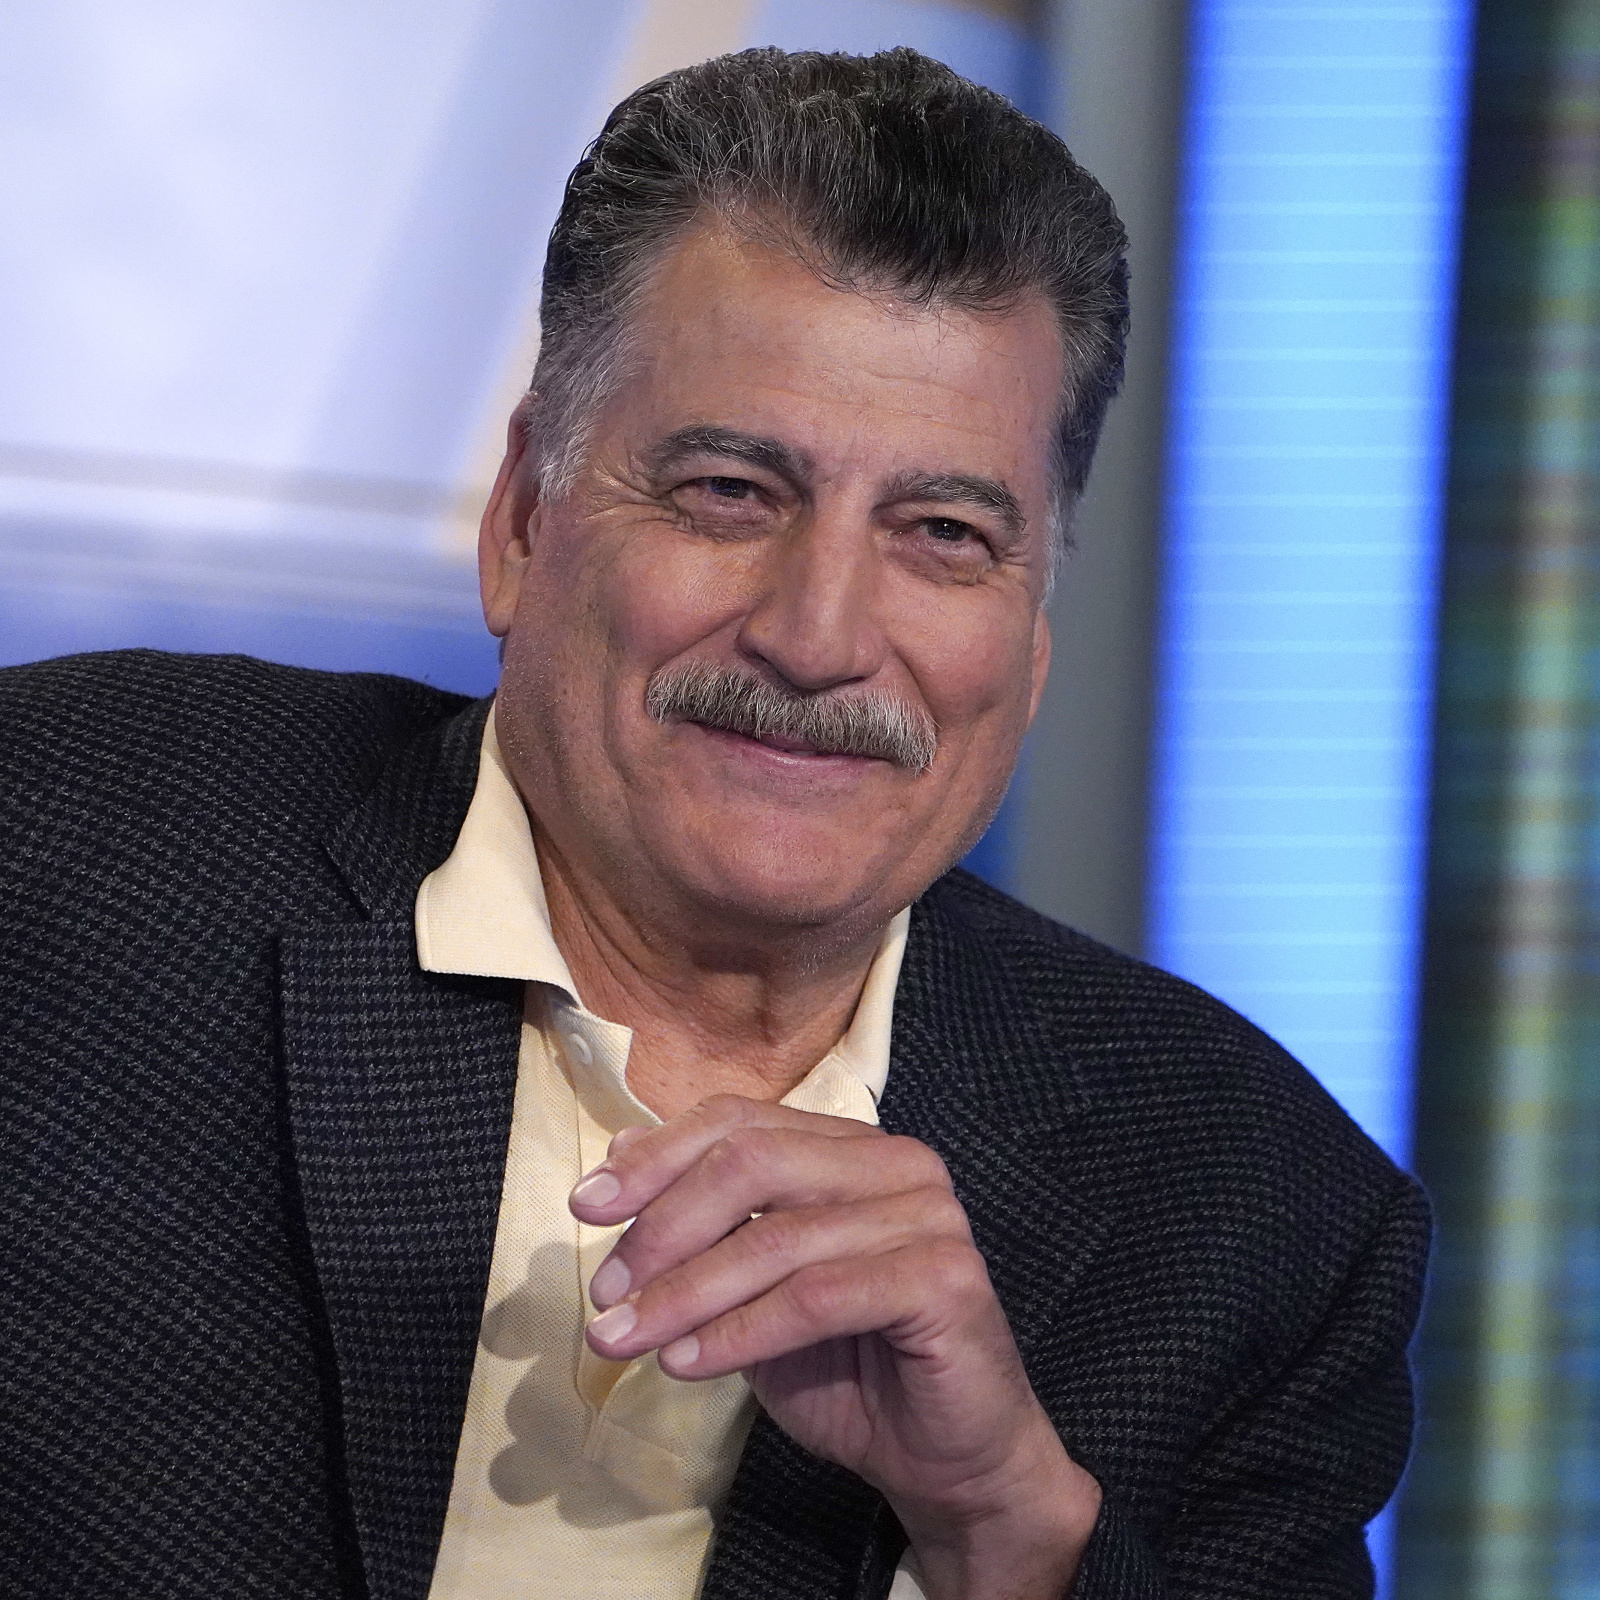 Keith Hernandez stunned by Mets jersey retirement news, Taiwan News